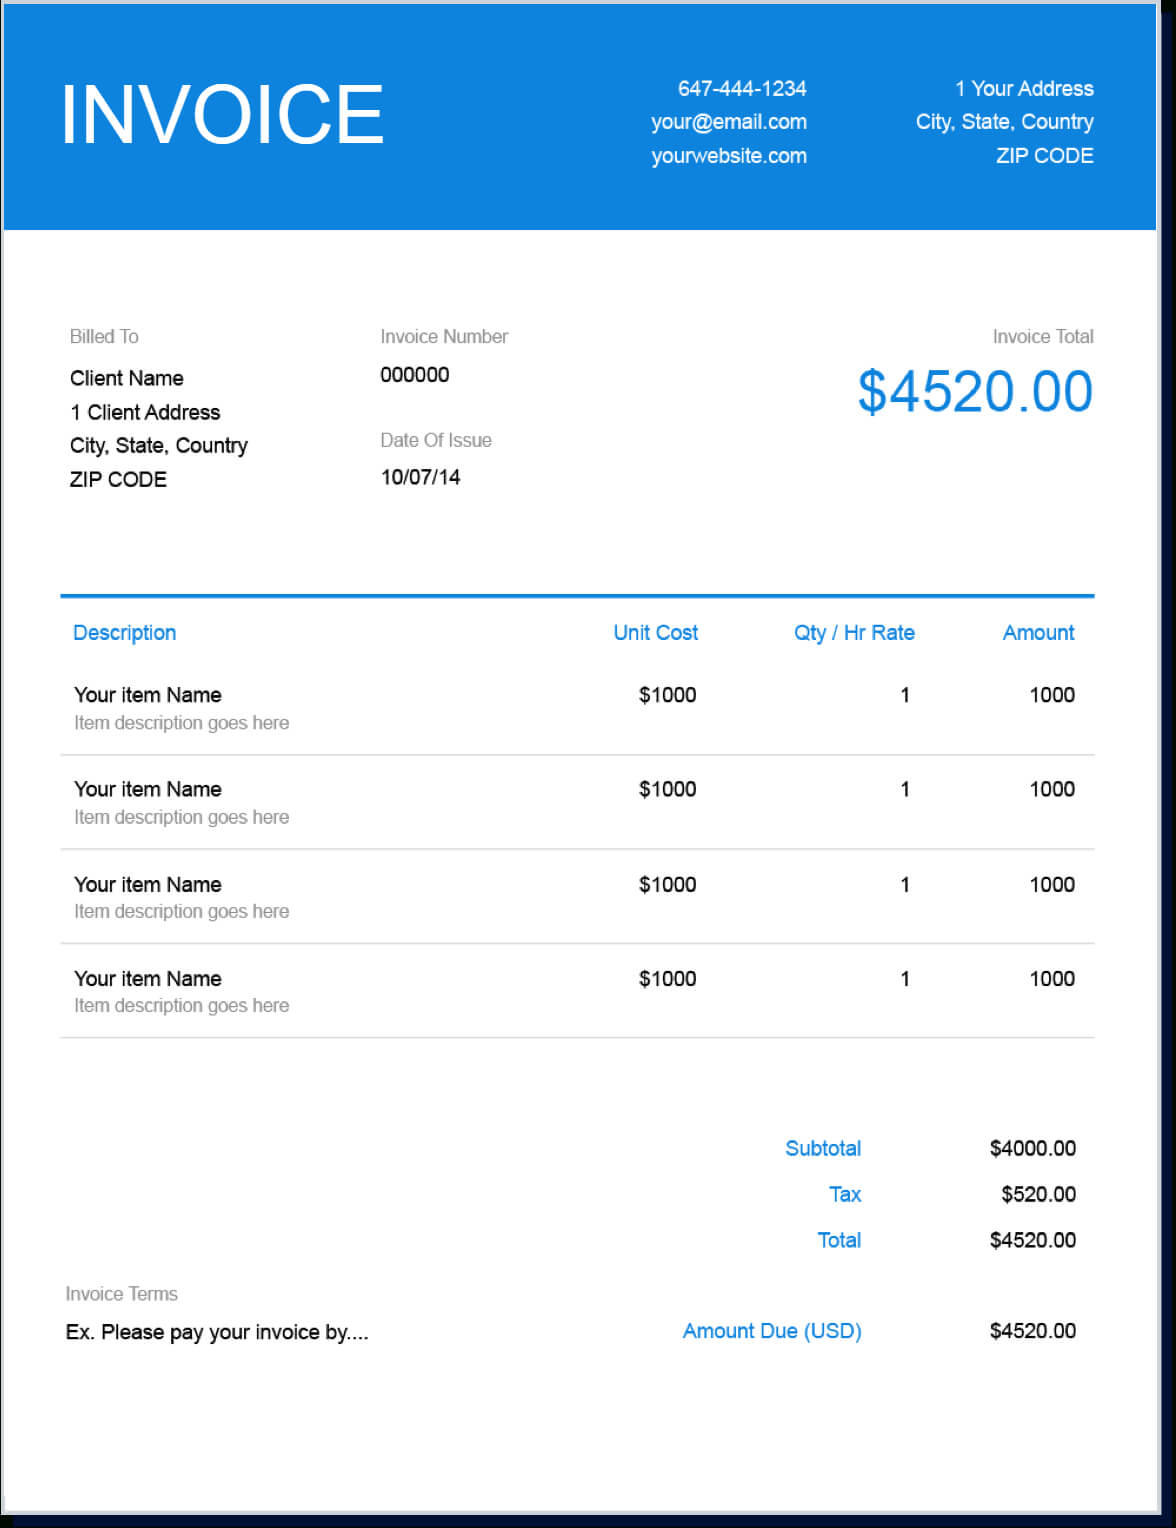 Invoice Template | Create And Send Free Invoices Instantly Inside Free Invoice Template Word Mac